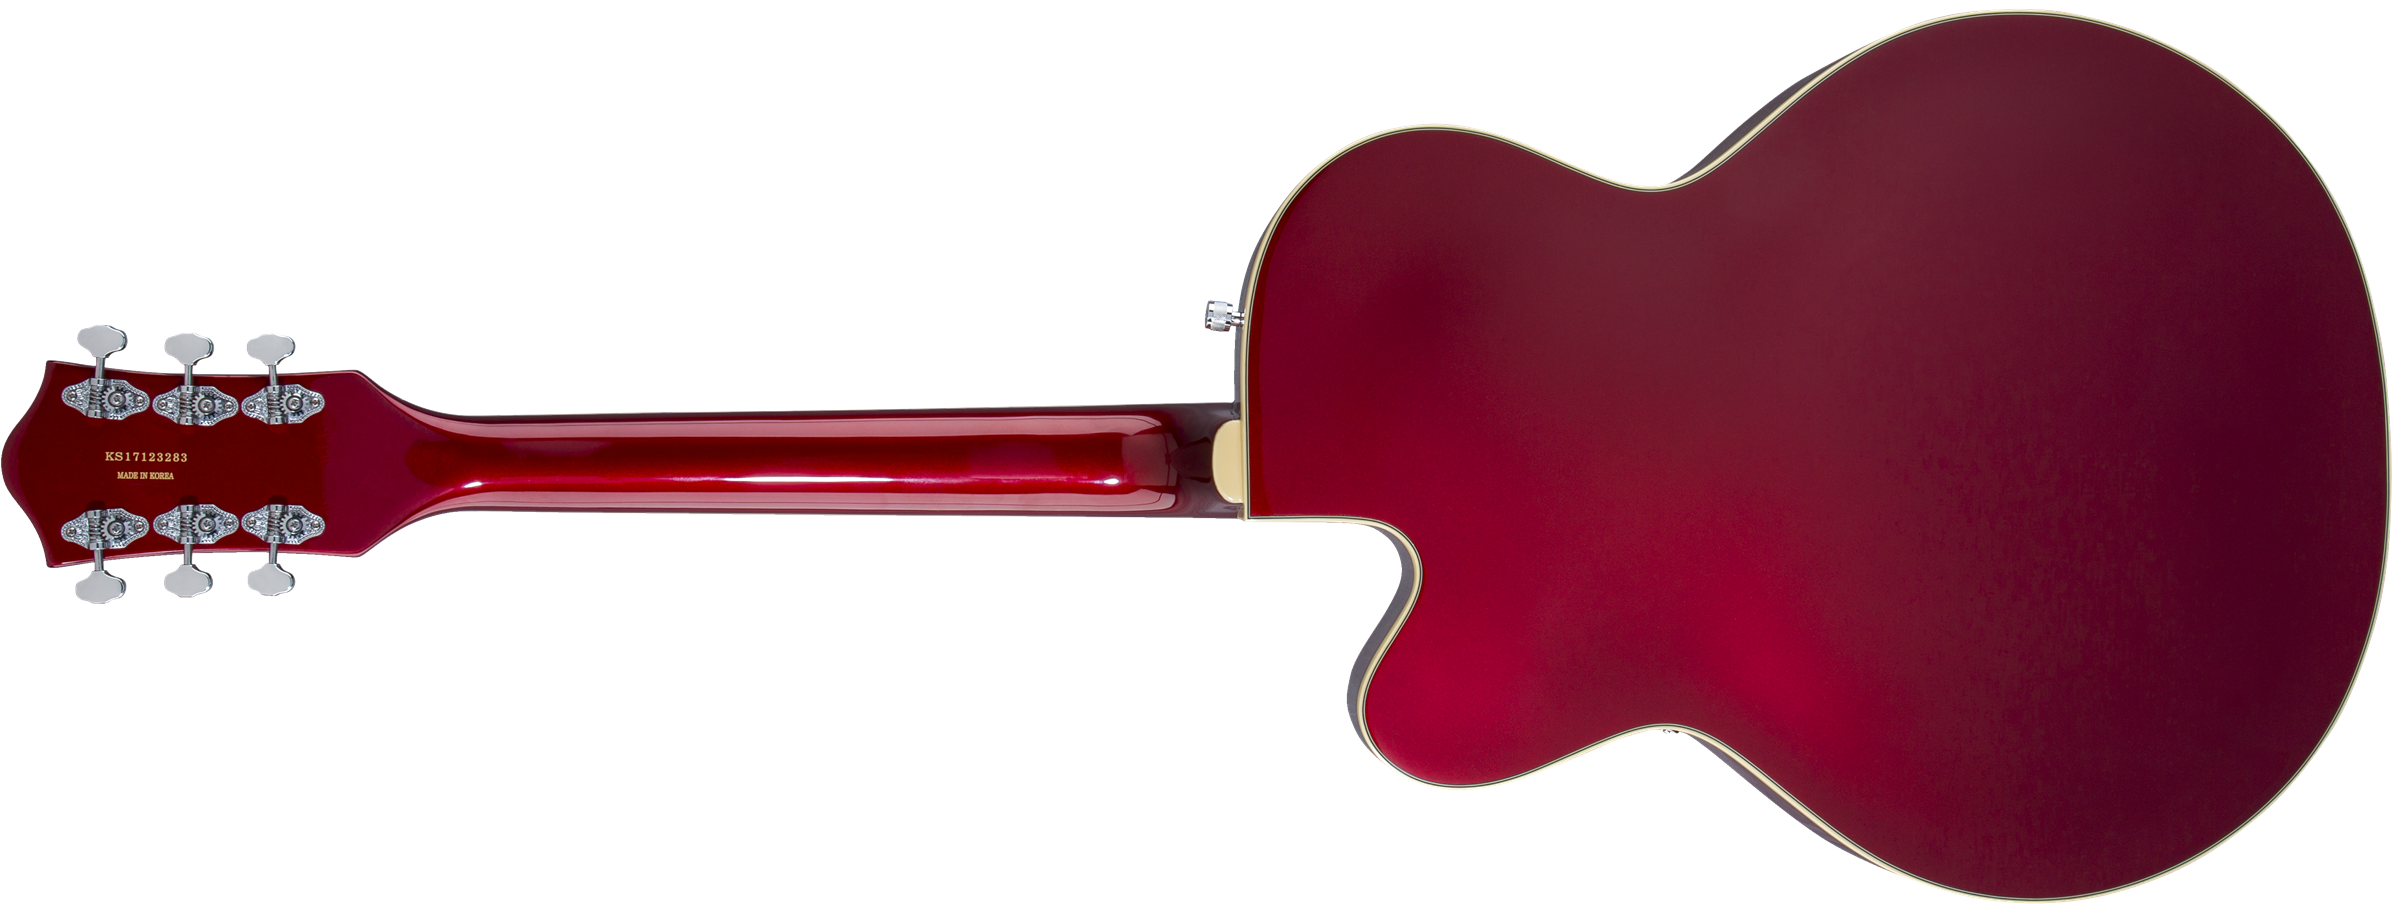 Gretsch G5420t Electromatic Hollow Body 2018 - Candy Apple Red - Semi-Hollow E-Gitarre - Variation 1